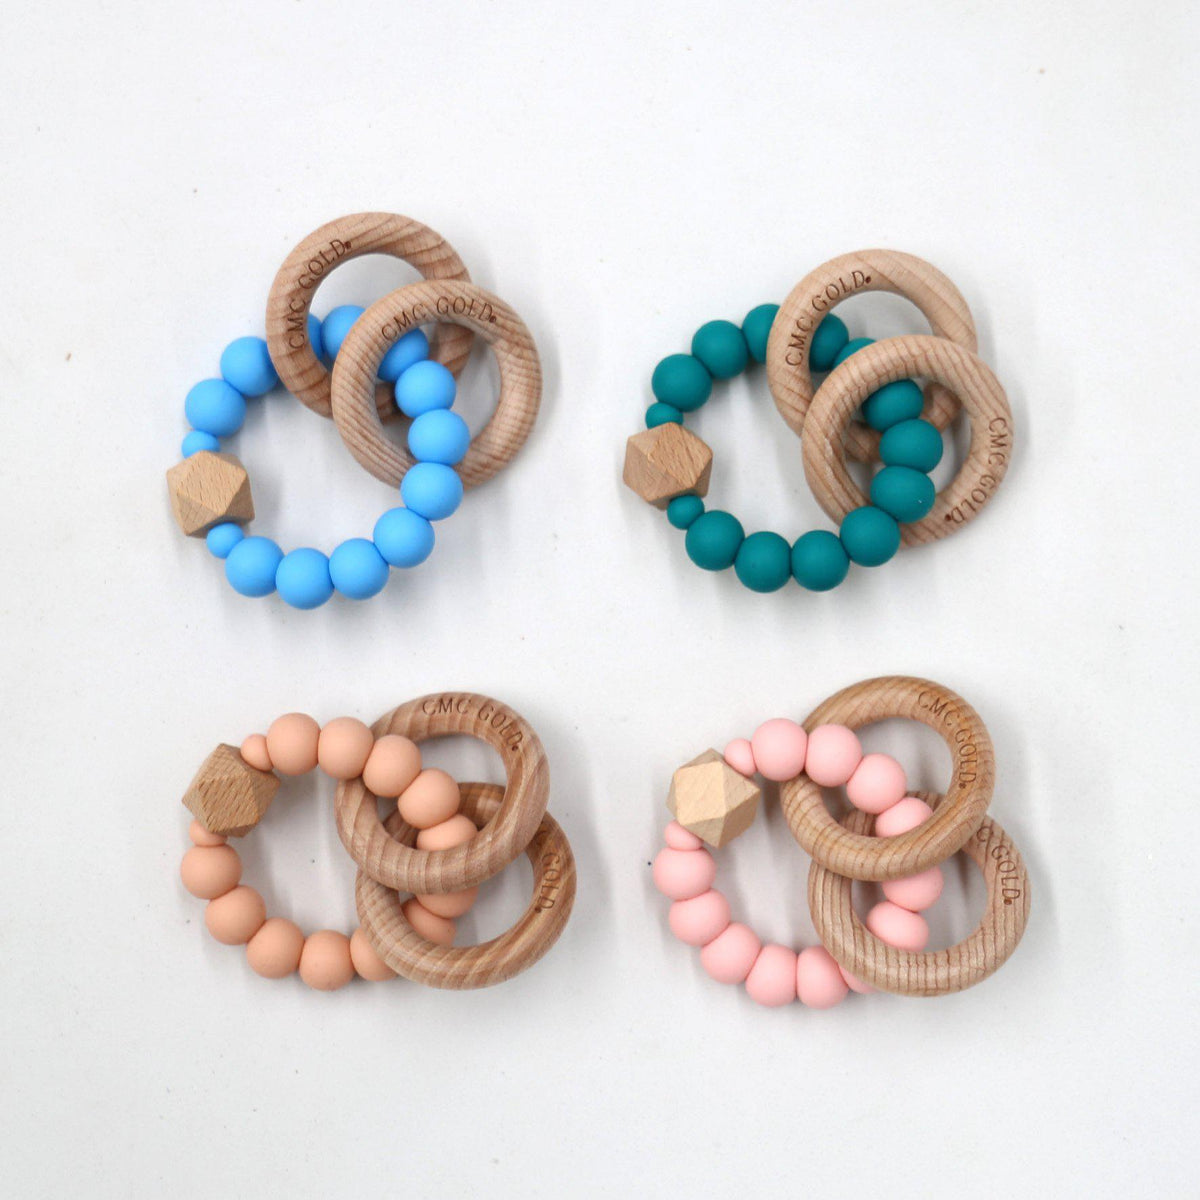 CMC GOLD - Hex & Silicone Teether